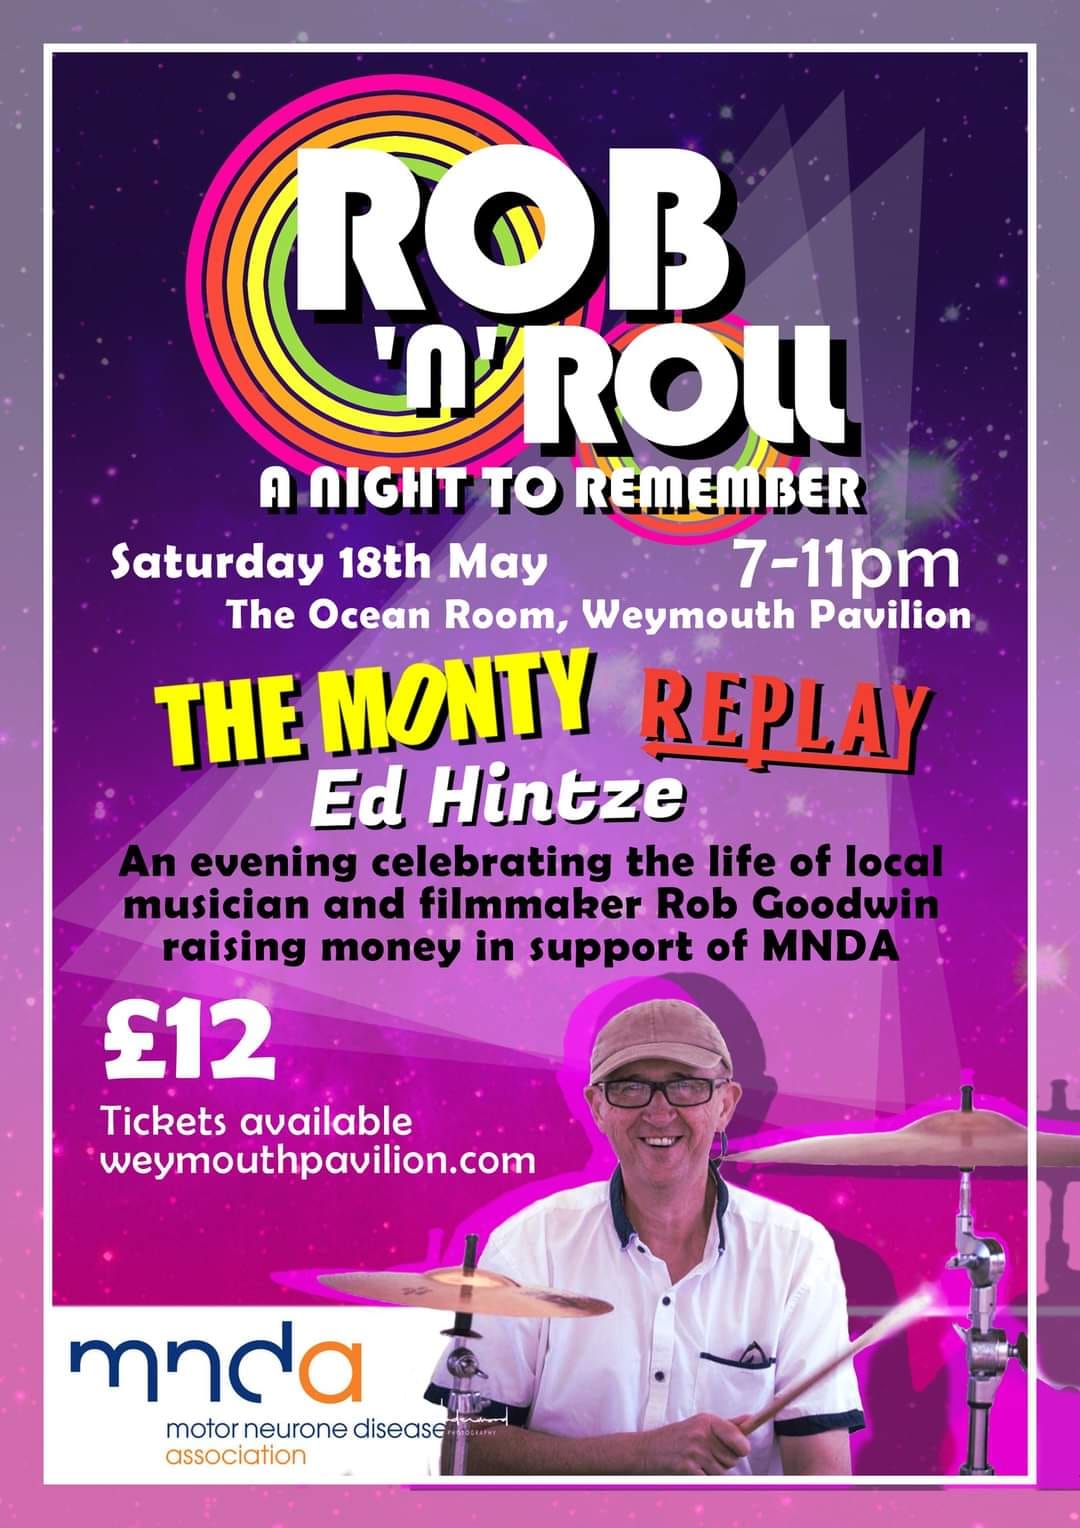 Poster advertising an event 'Rob n Roll' an evening celebrating the life of local musician and filmmaker Rob Goodwin raising money in support of MNDA